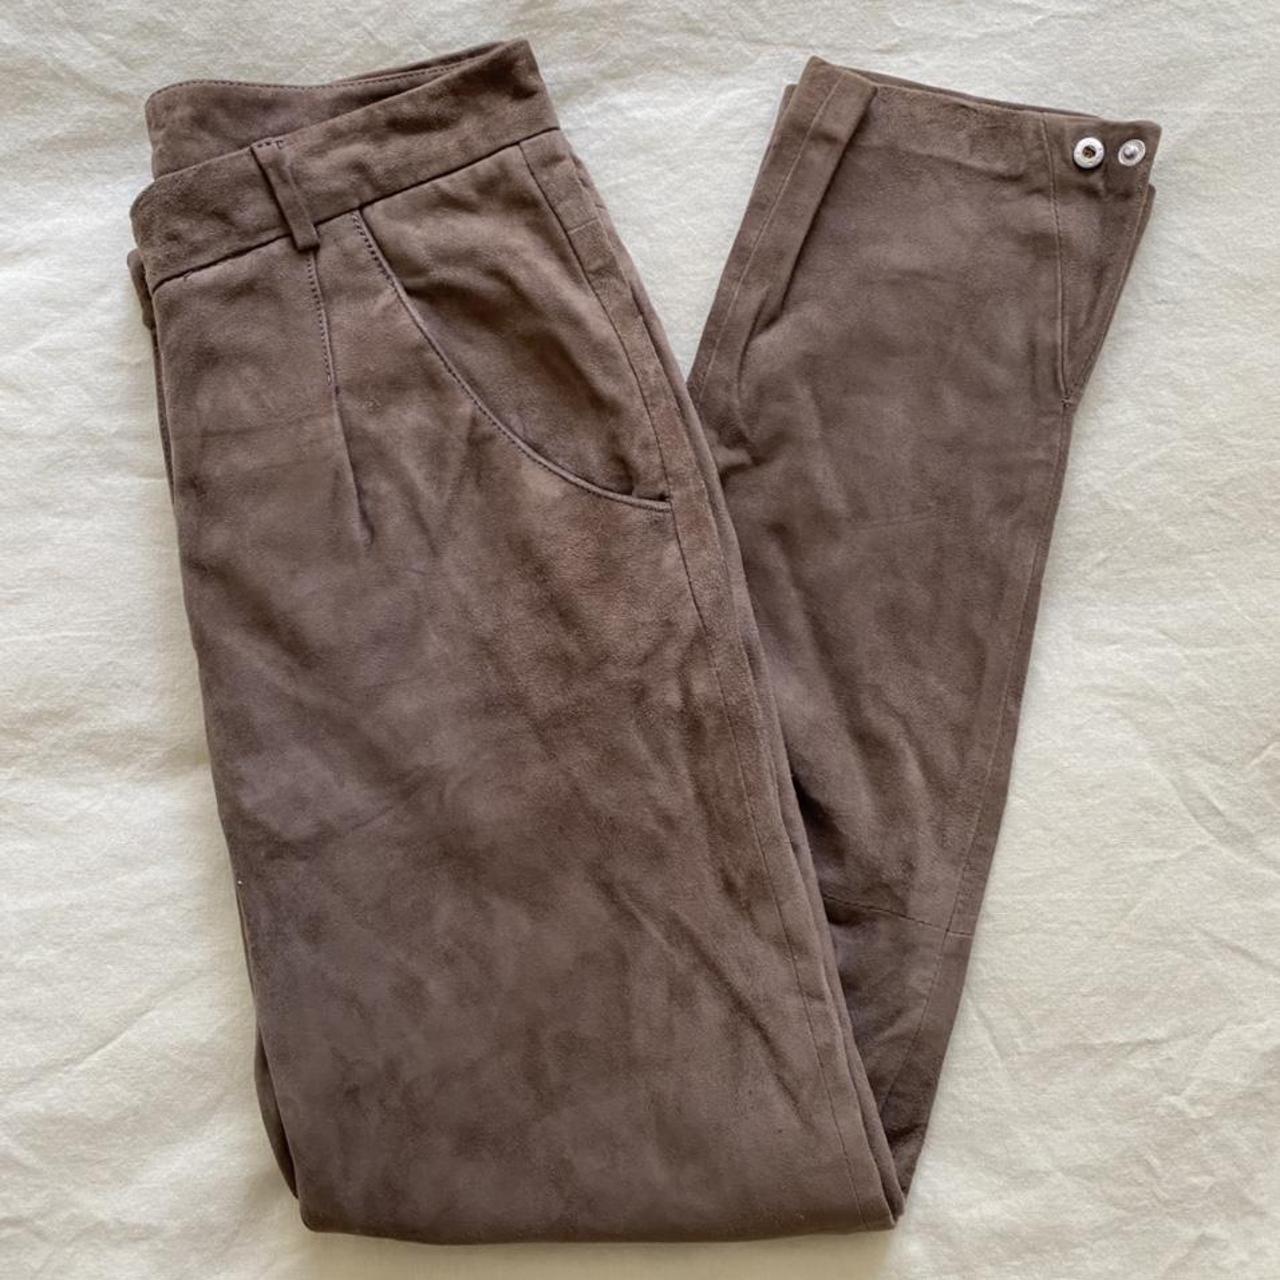 Product Image 1 - 100% italian suede leather pants